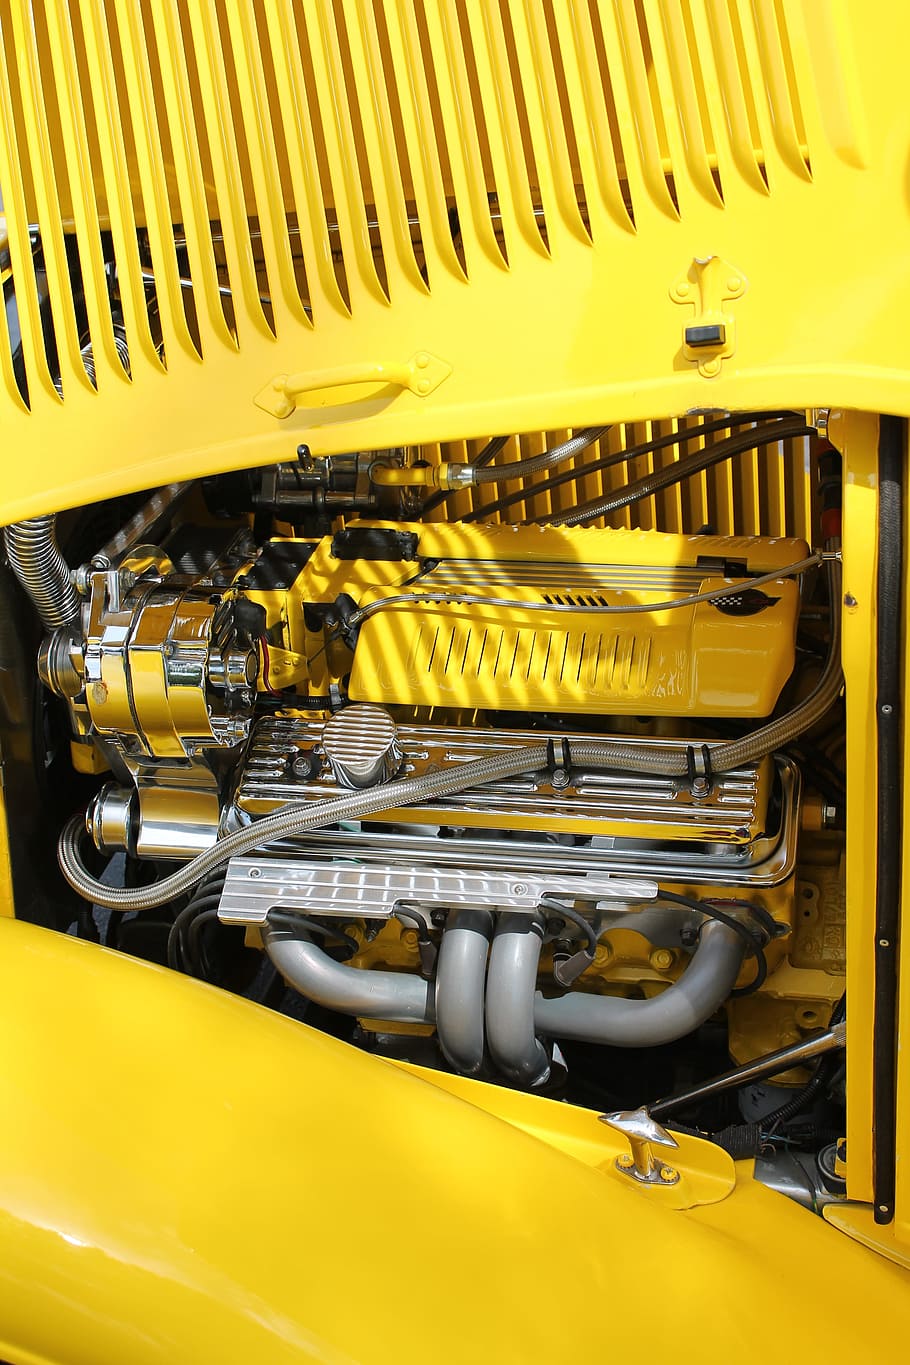 Ford, Motor, Engine, Yellow, ford motor, ford engine, vintage truck, transportation, truck, antique truck